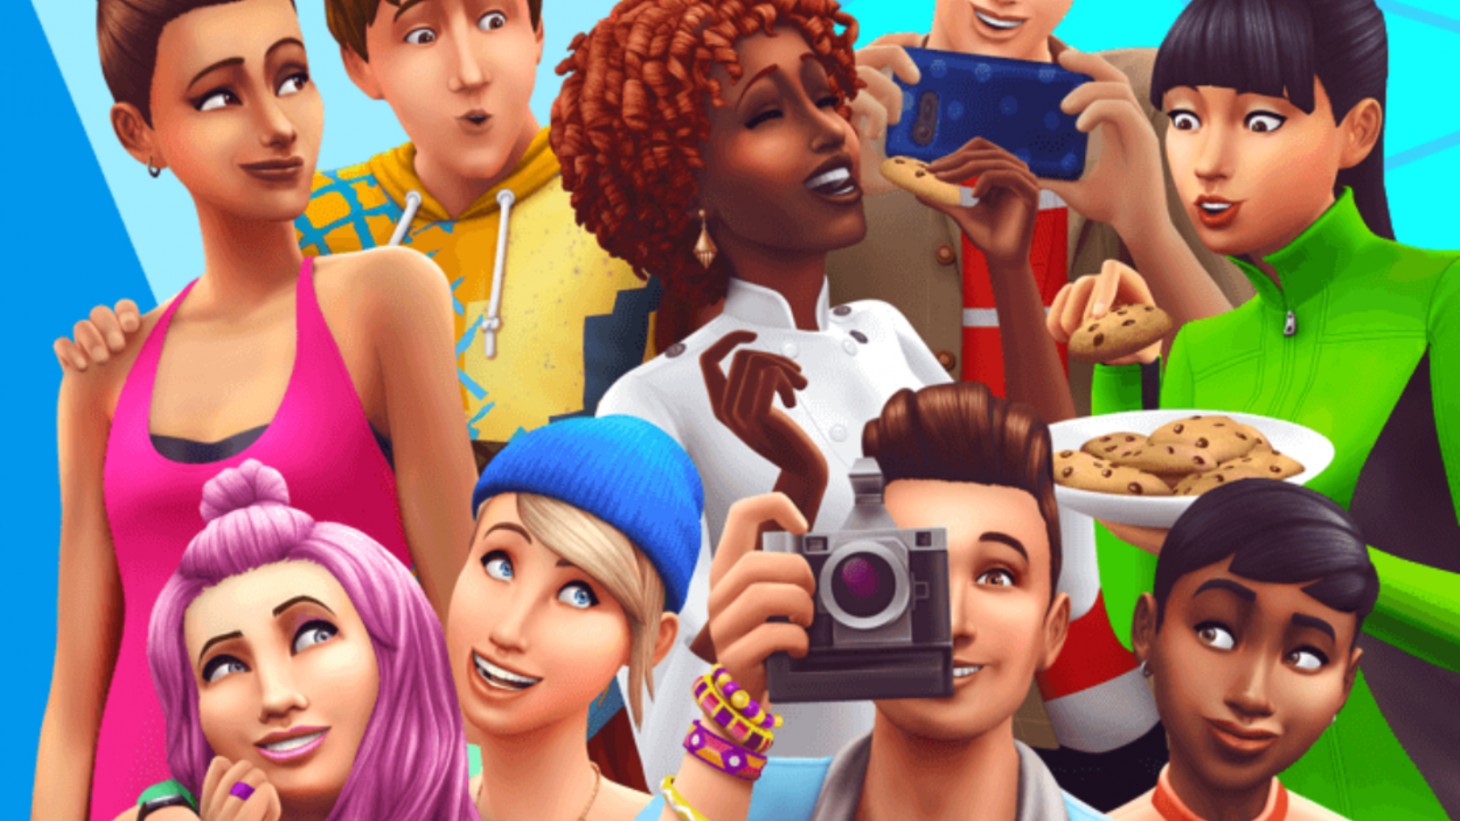 FREE The Sims 4 confirmed by EA! The game will be free-2-play next month (